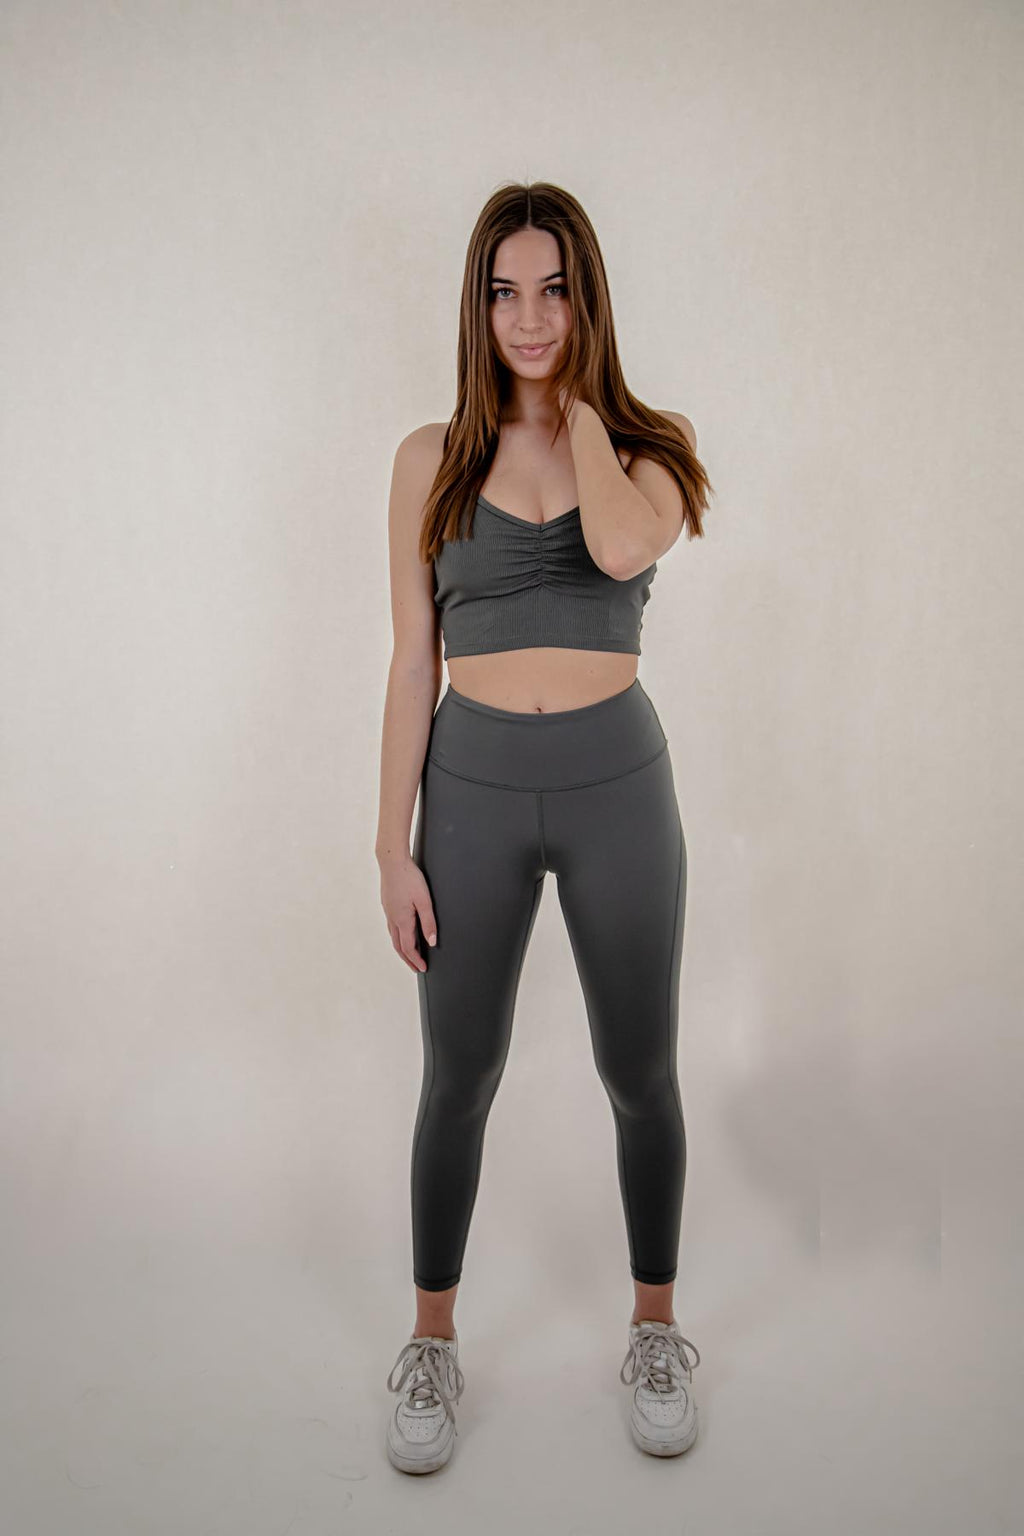 The Essentials, Paragon Fitwear